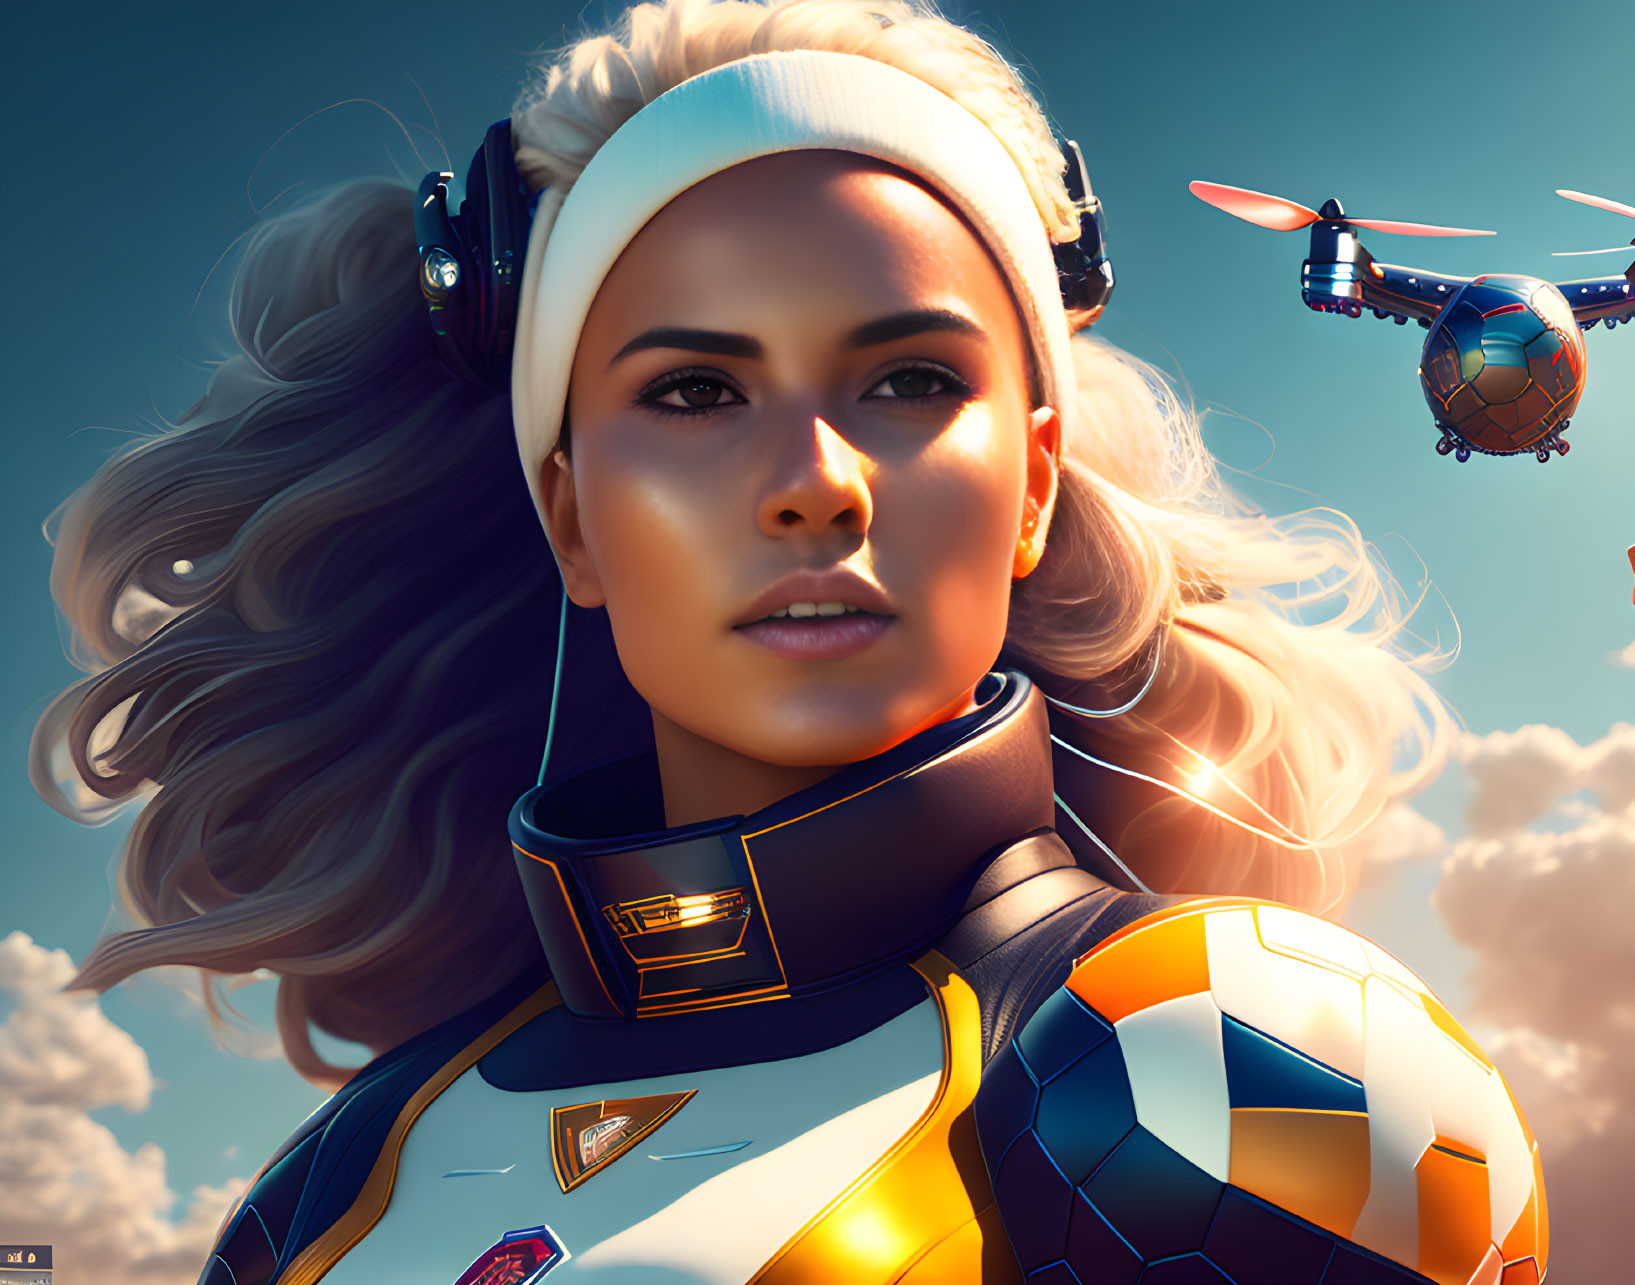 Futuristic digital artwork of woman in sportswear with drone and vibrant sky